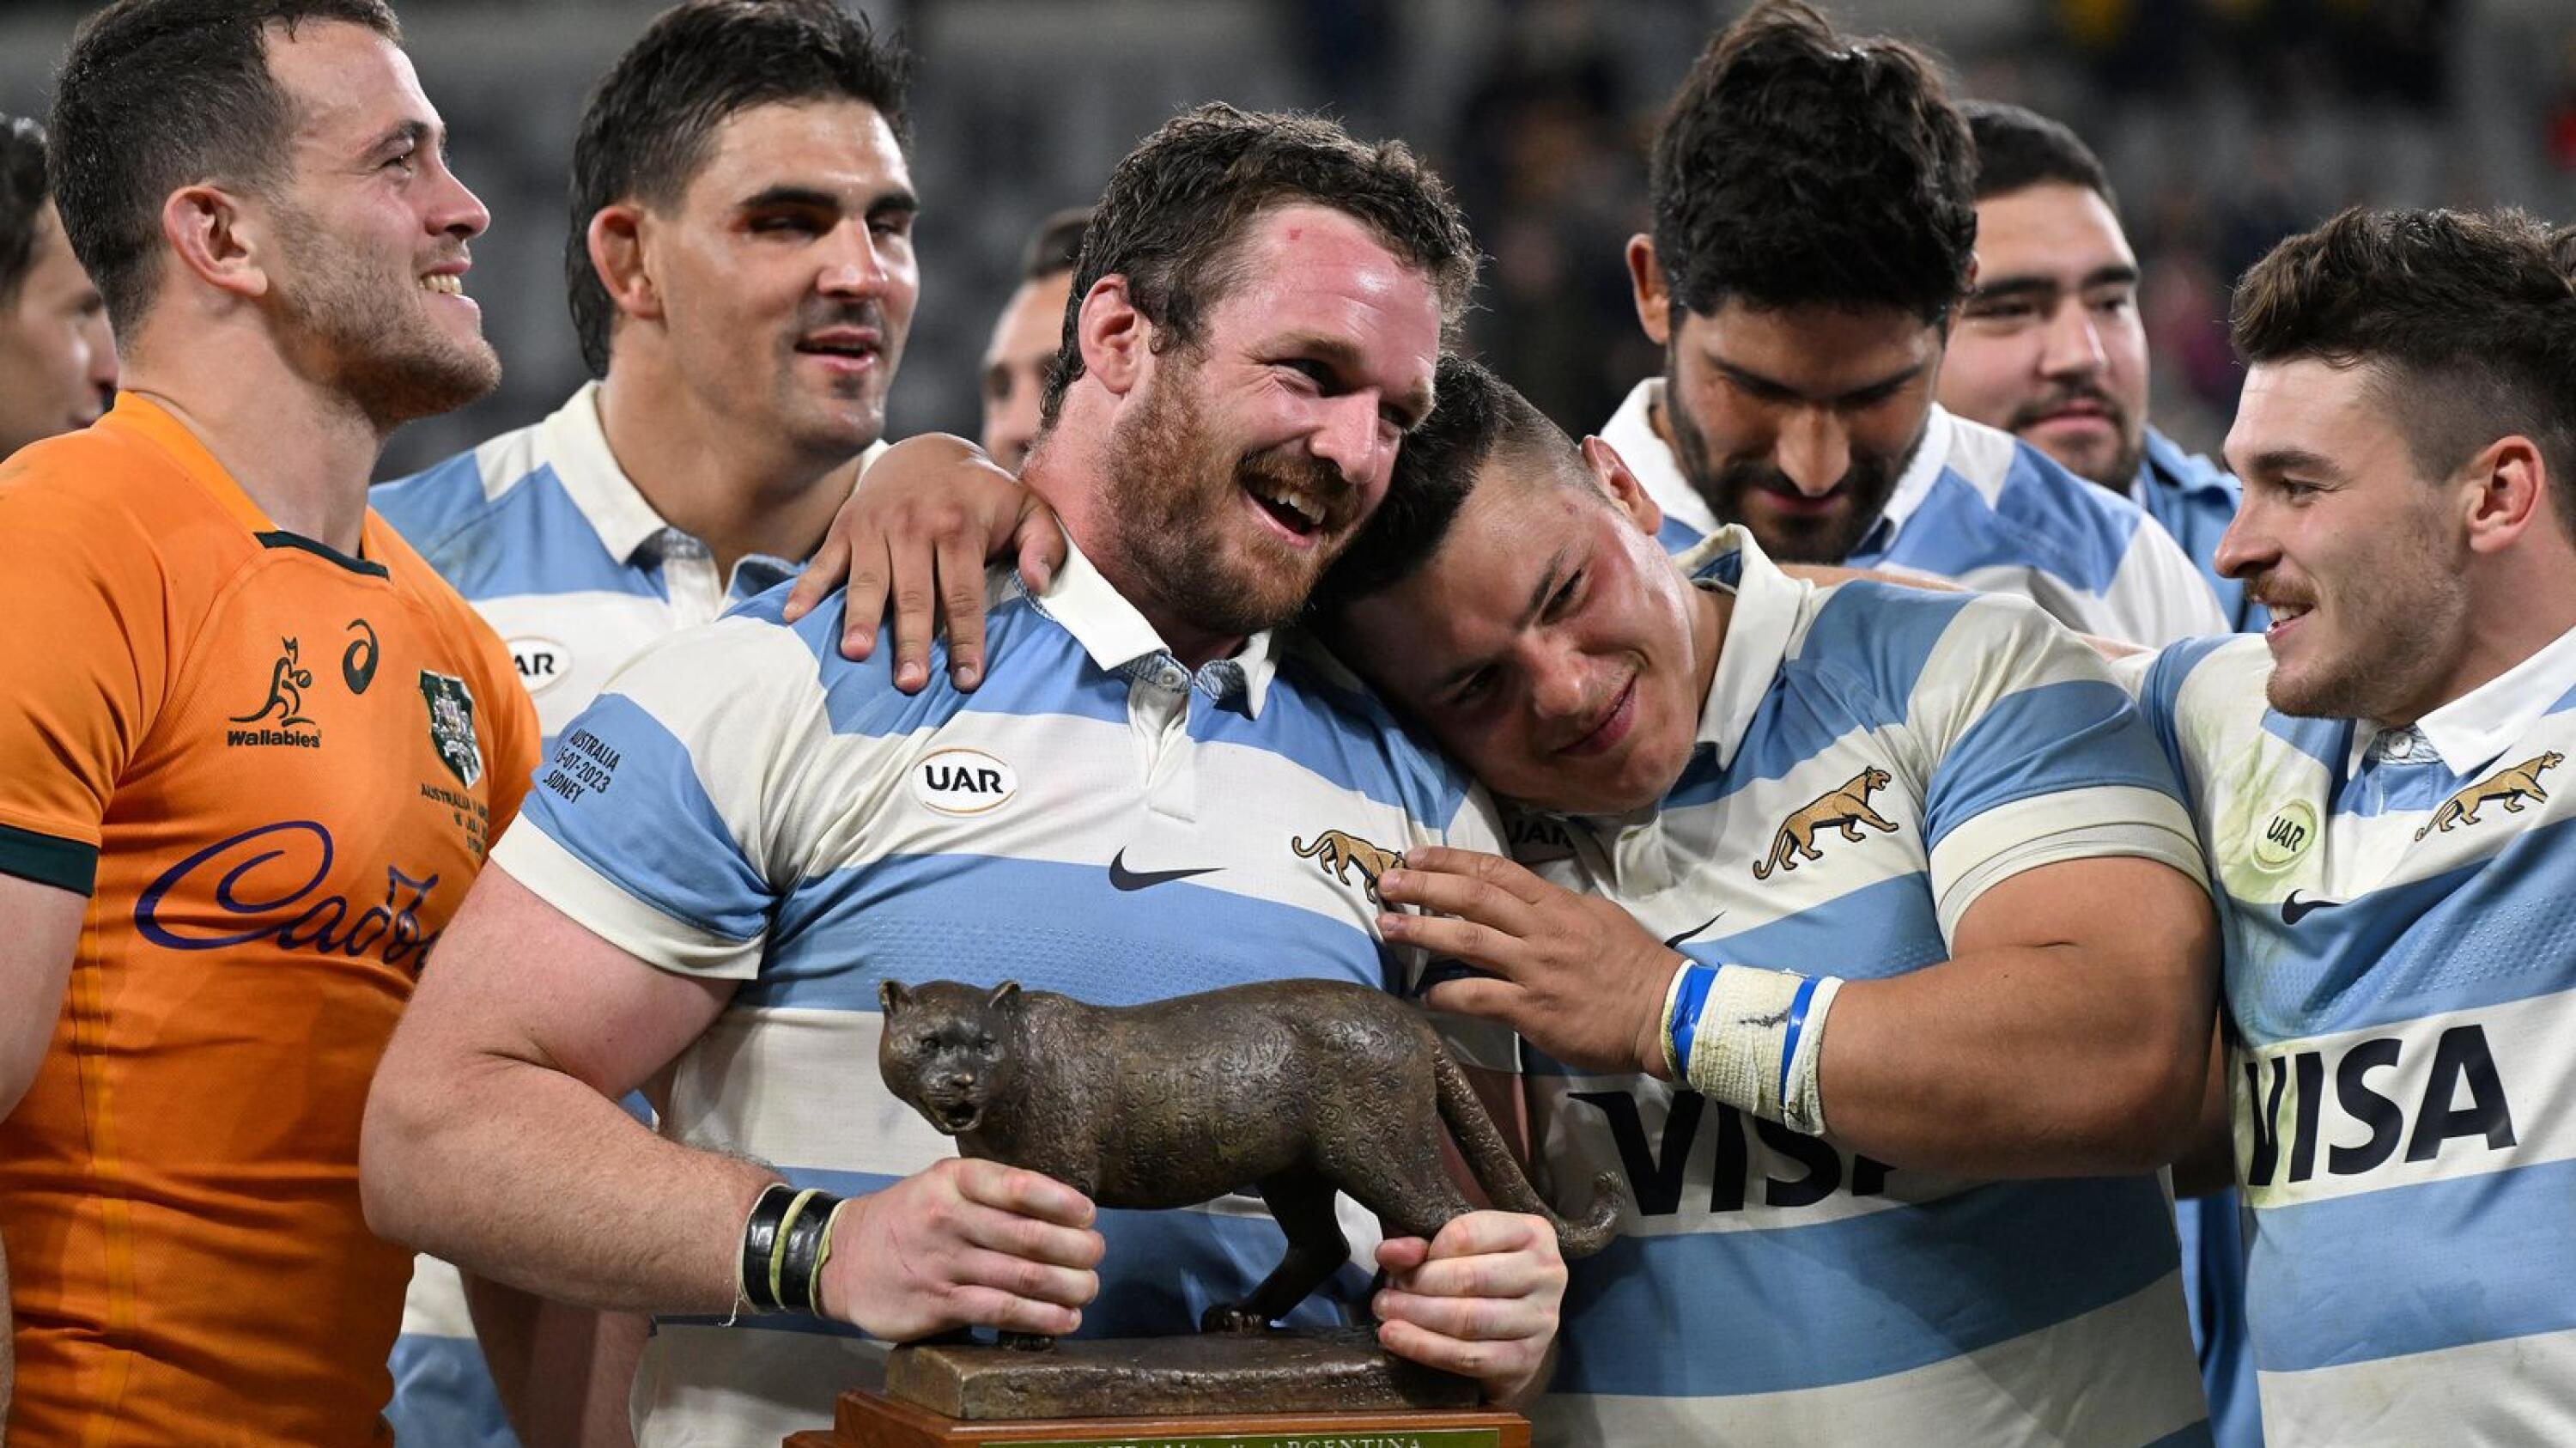 Argentina’s captain Julian Montoyo celebrates with teammates after the winning Puma Trophy after their Rugby Championship match against Australia at Commbank Stadium in Sydney on Saturday